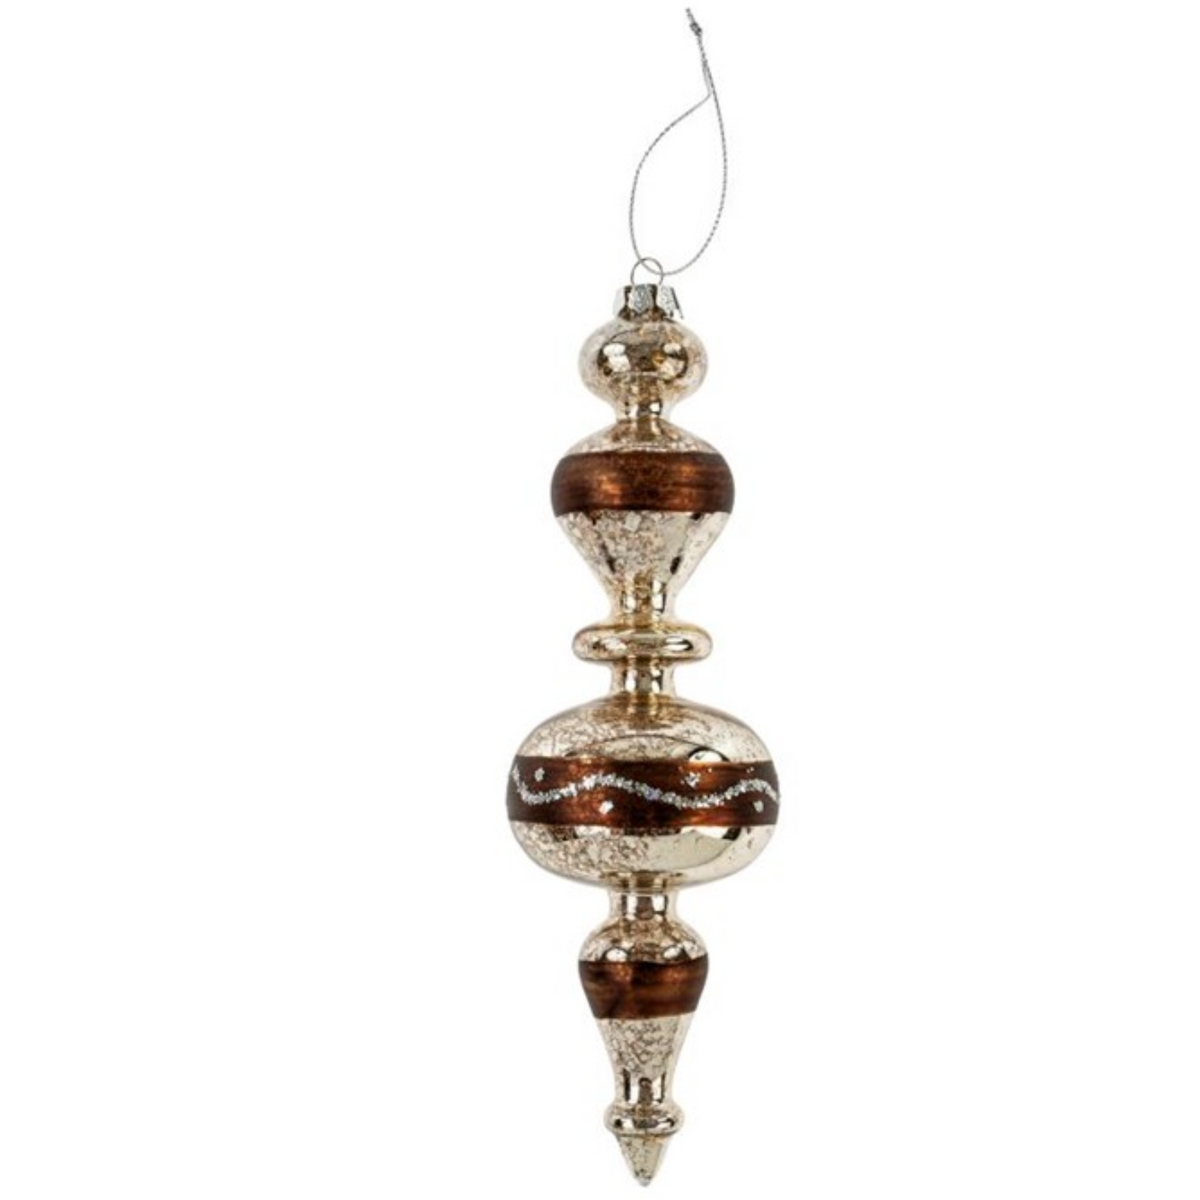 Ava Spindle Glass Ornament, Brown